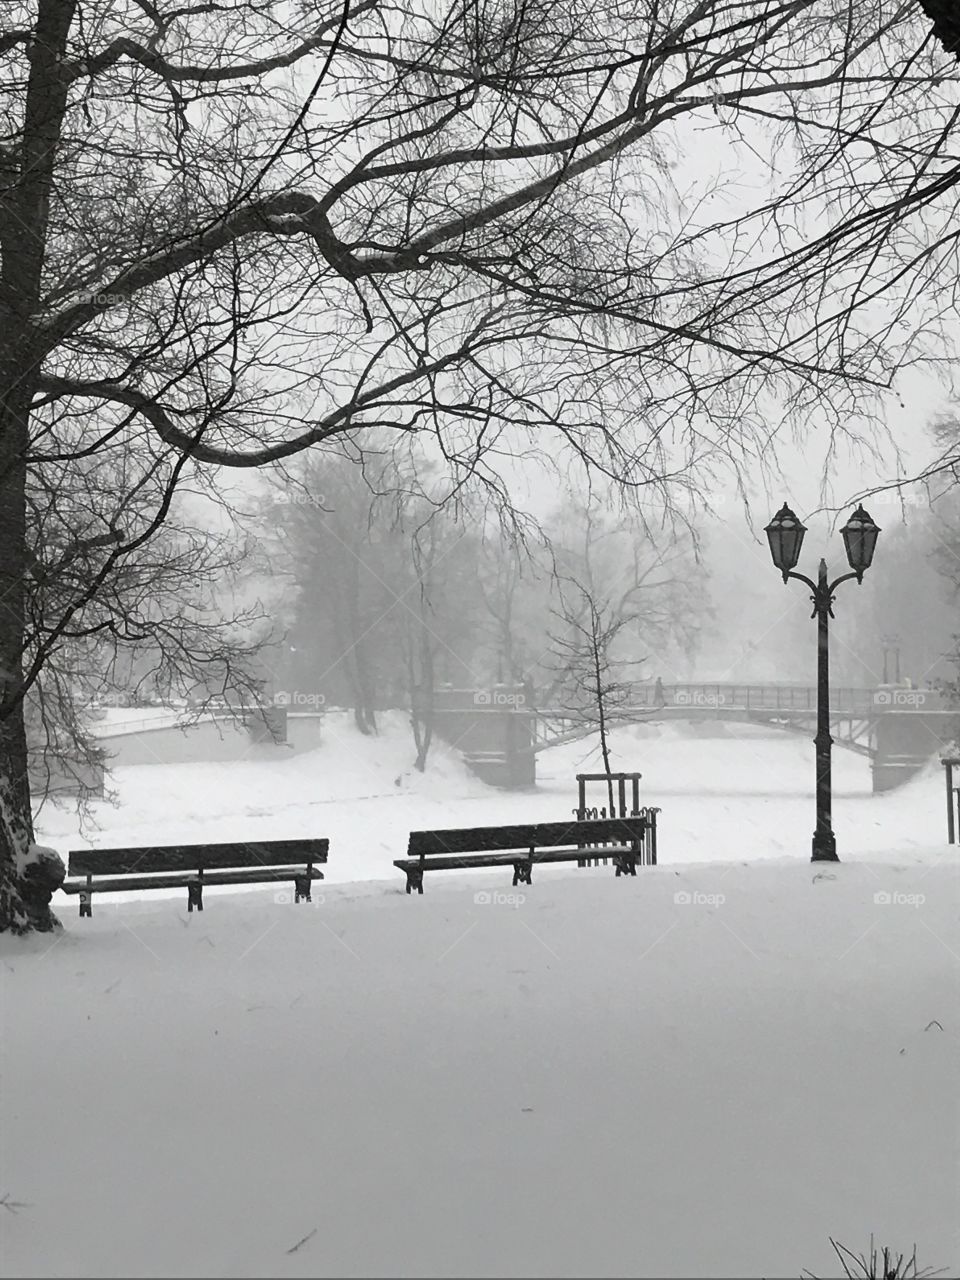 A winterview of a park in Riga, Latvia